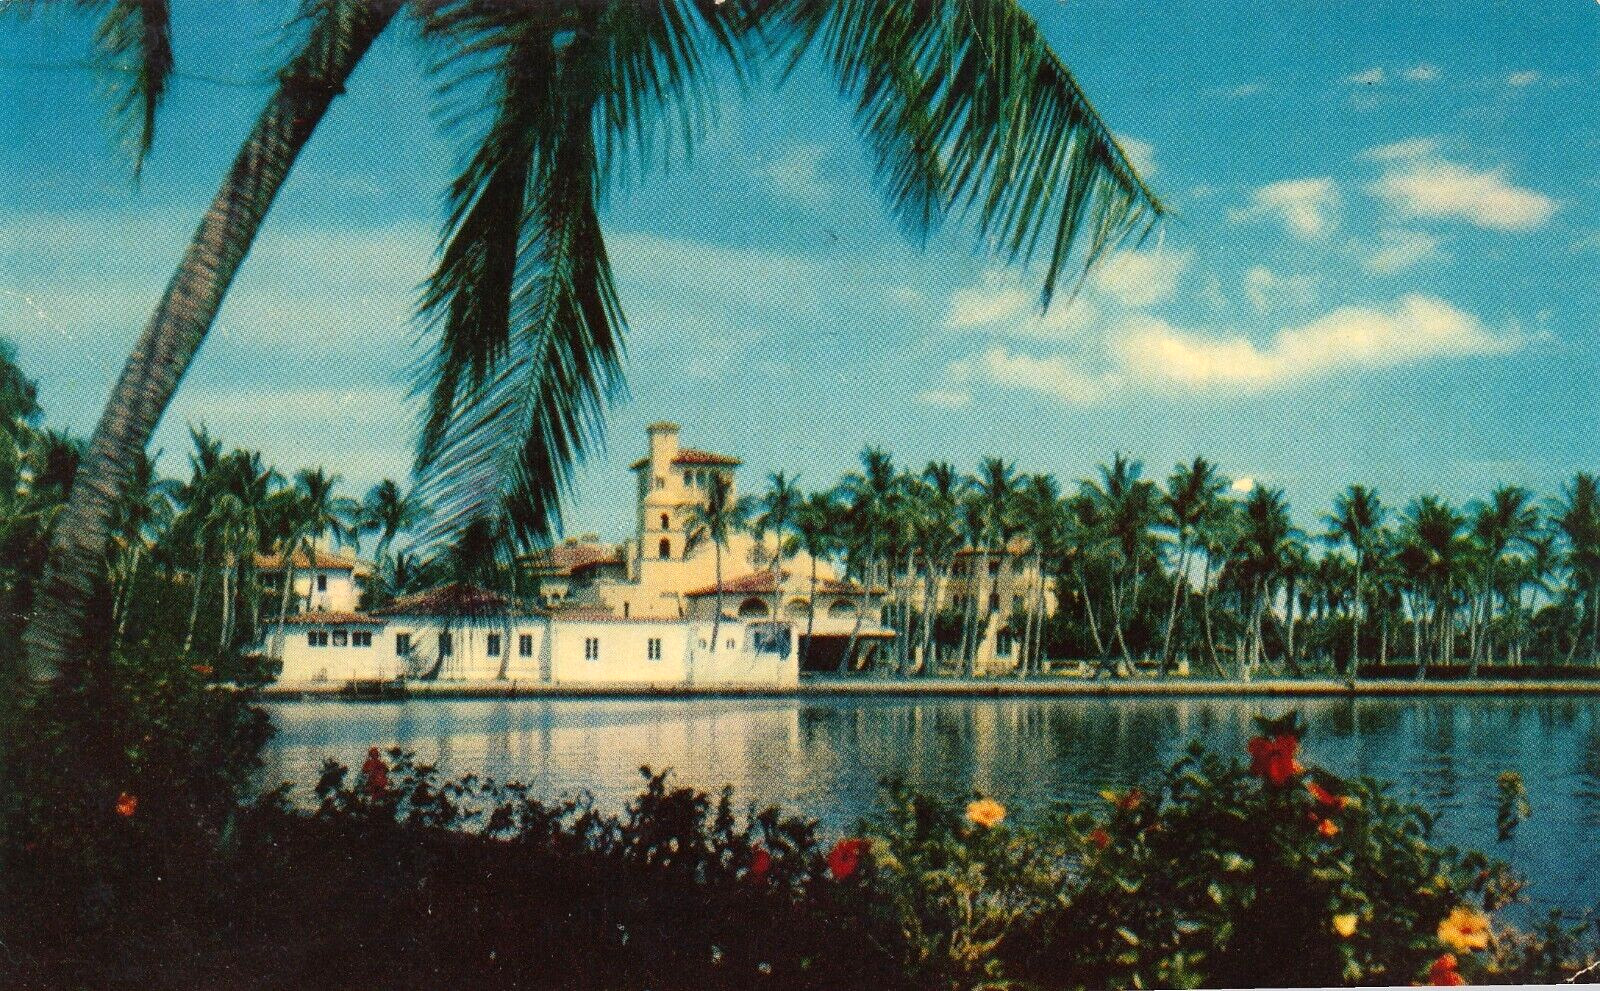 Everglades Club at Lake Worth in Palm Beach, Florida 1960 posted vintage